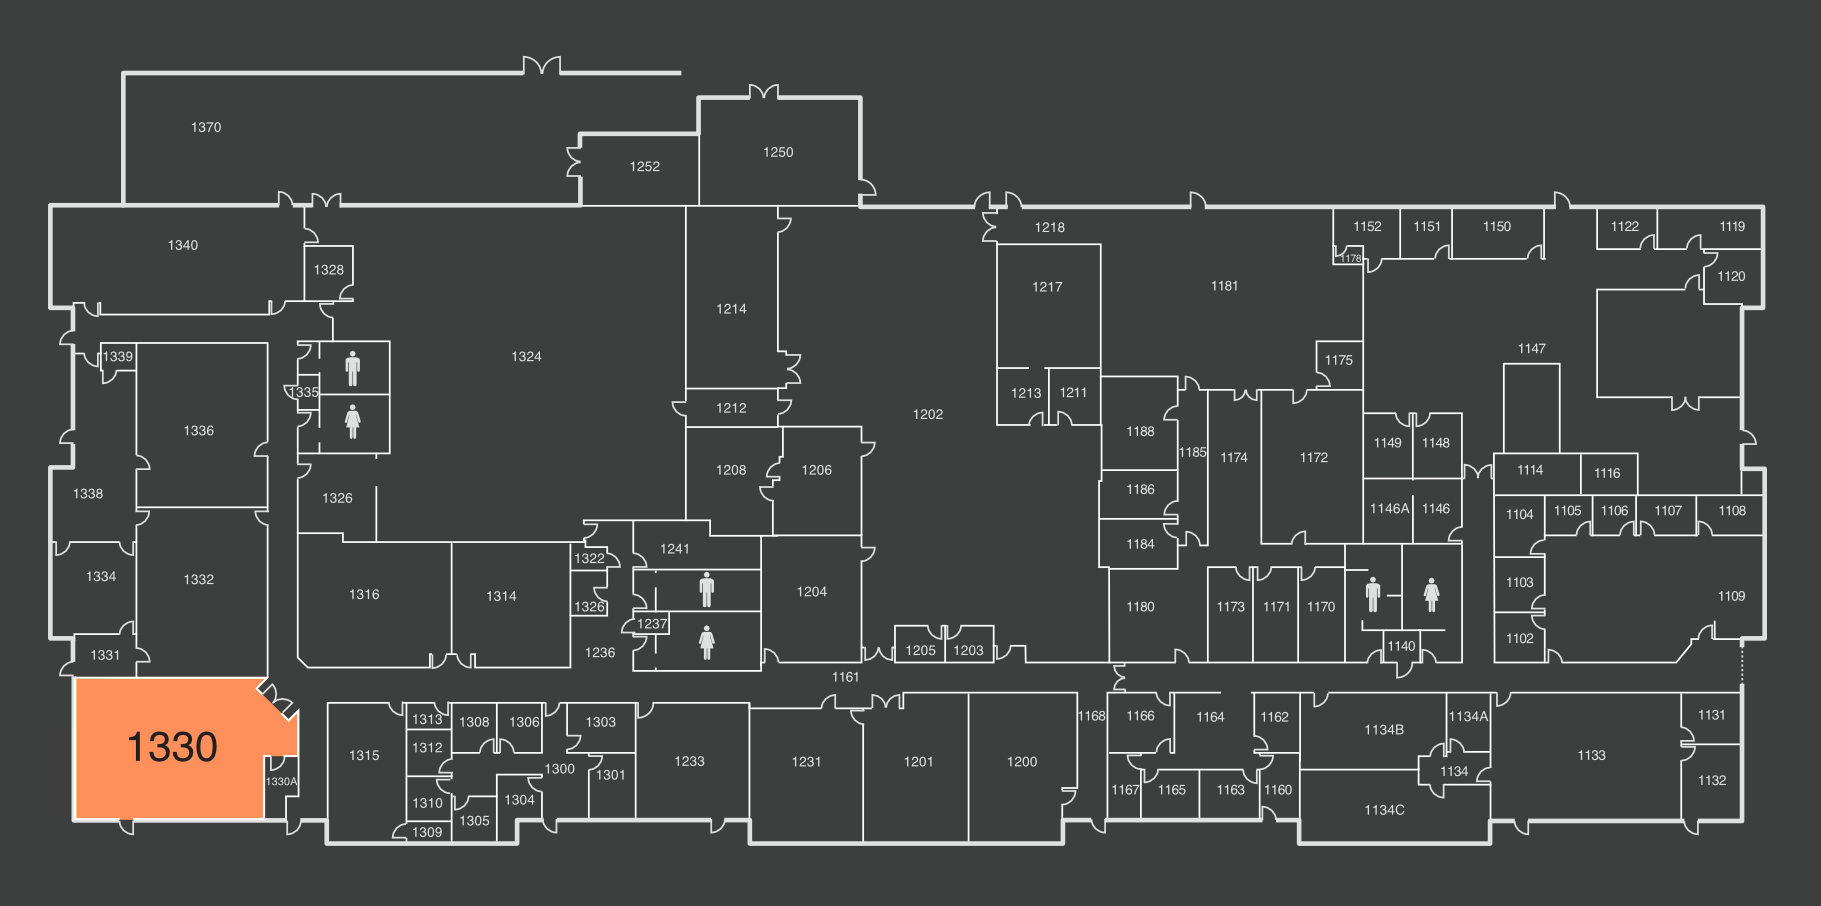 Floorplan for the South Building and room SO1330 at Gateway Community College